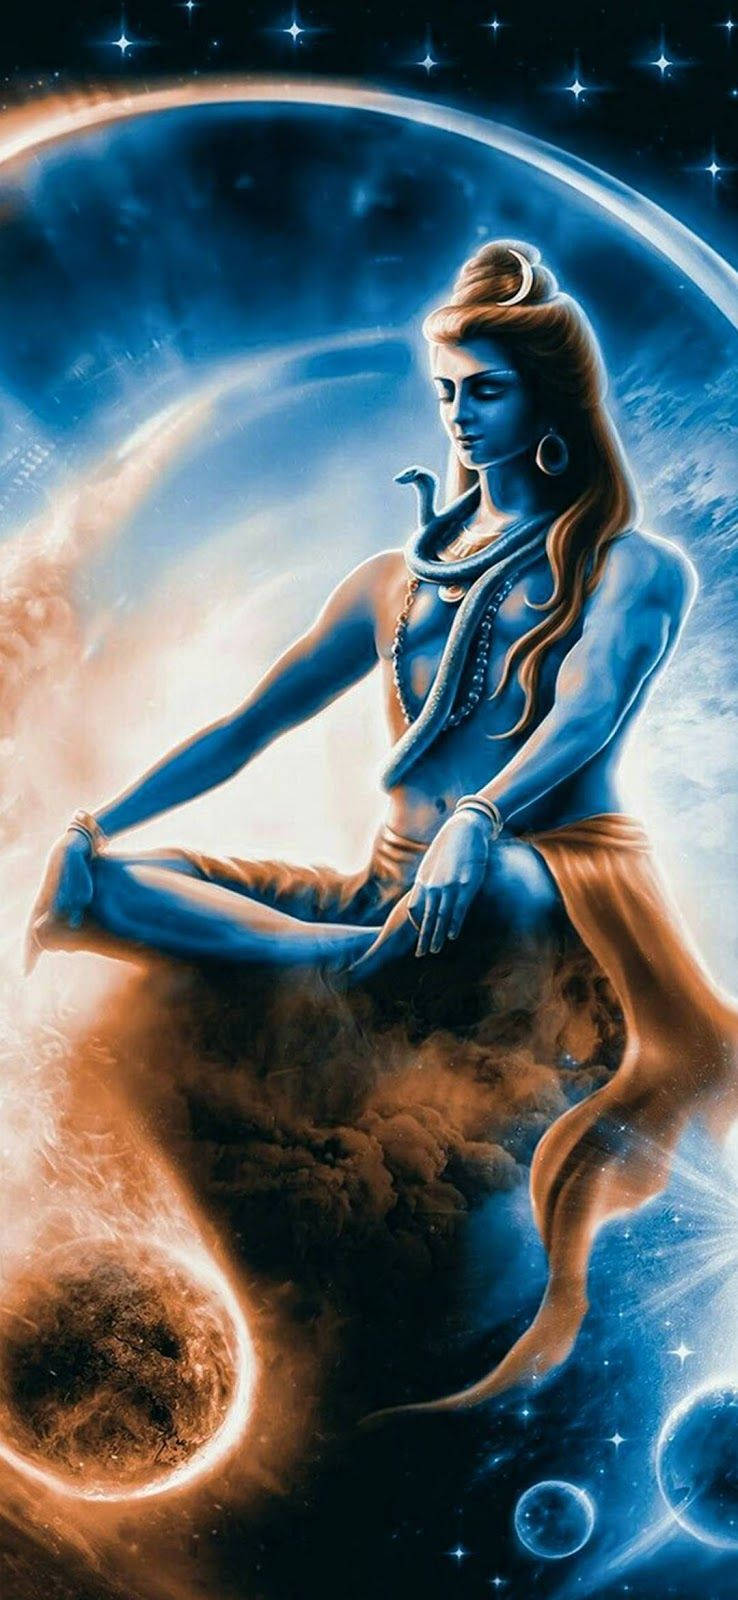 Lord Shiva Mobile Meditating In Space Wallpaper